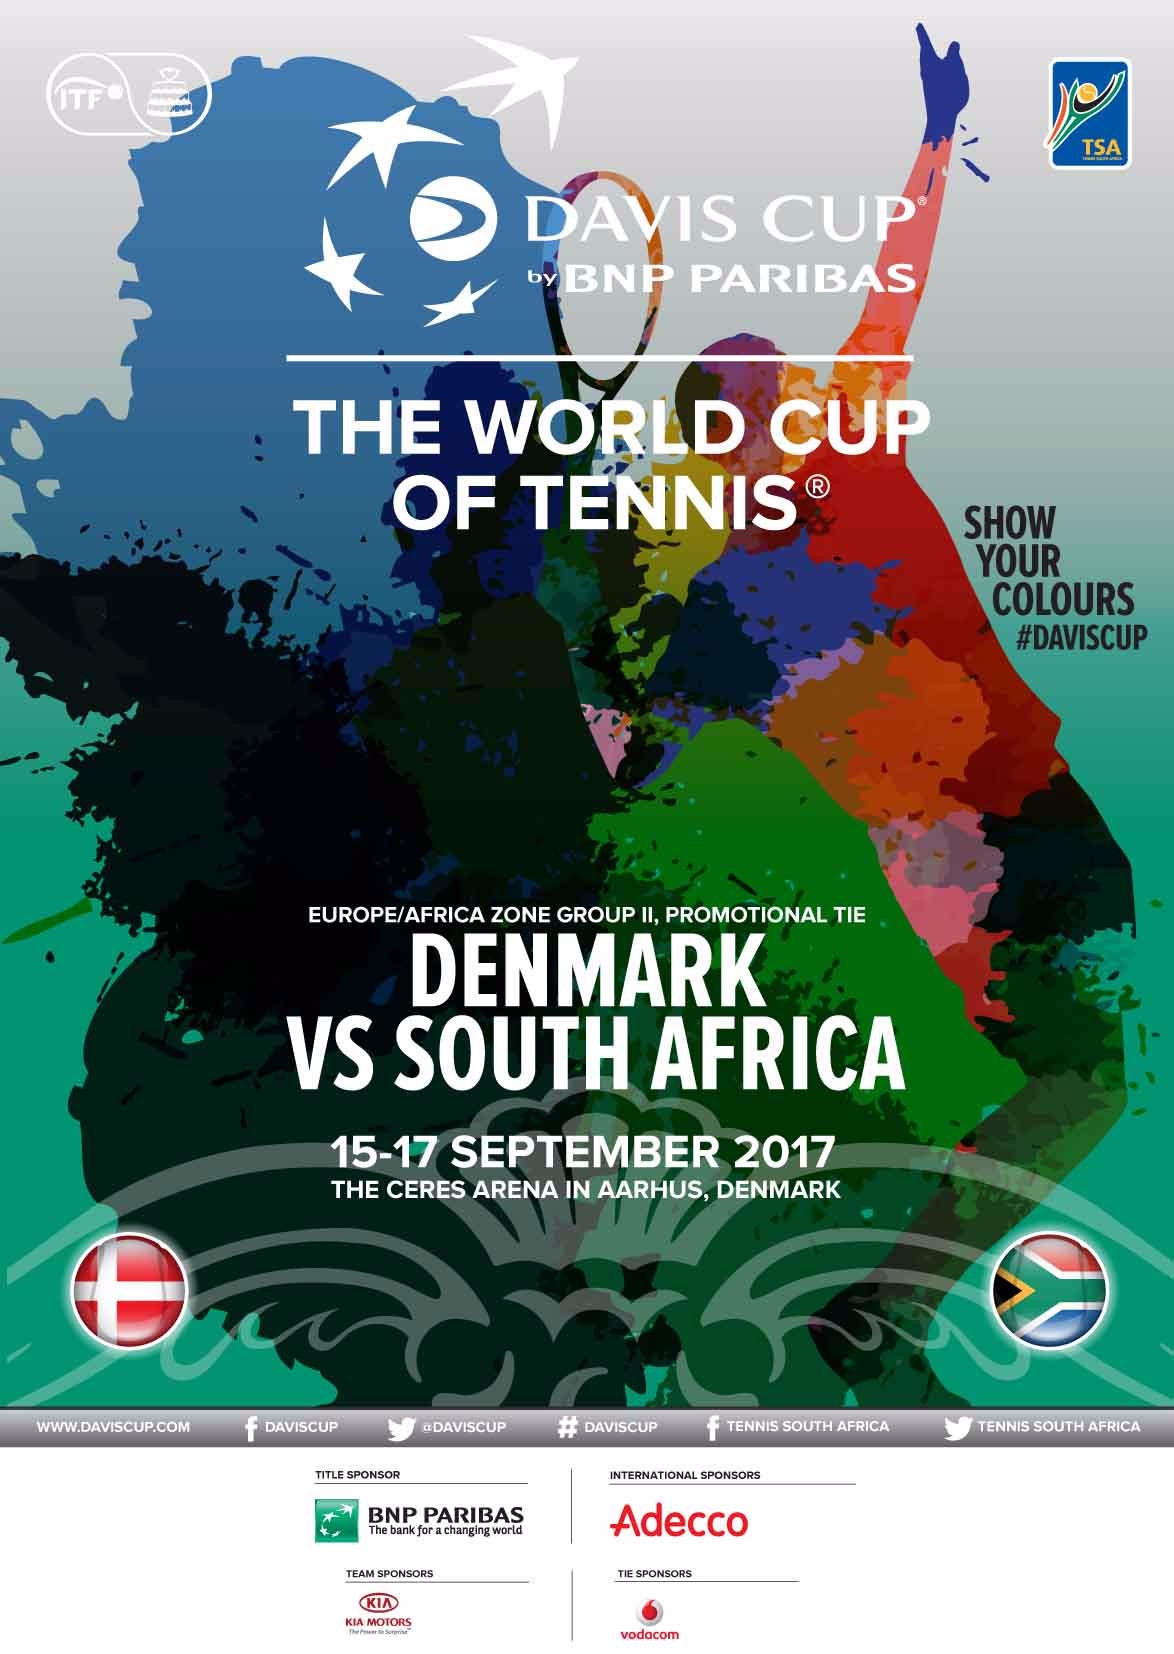 Watch our Davis Cup tie LIVE on Vodacom!